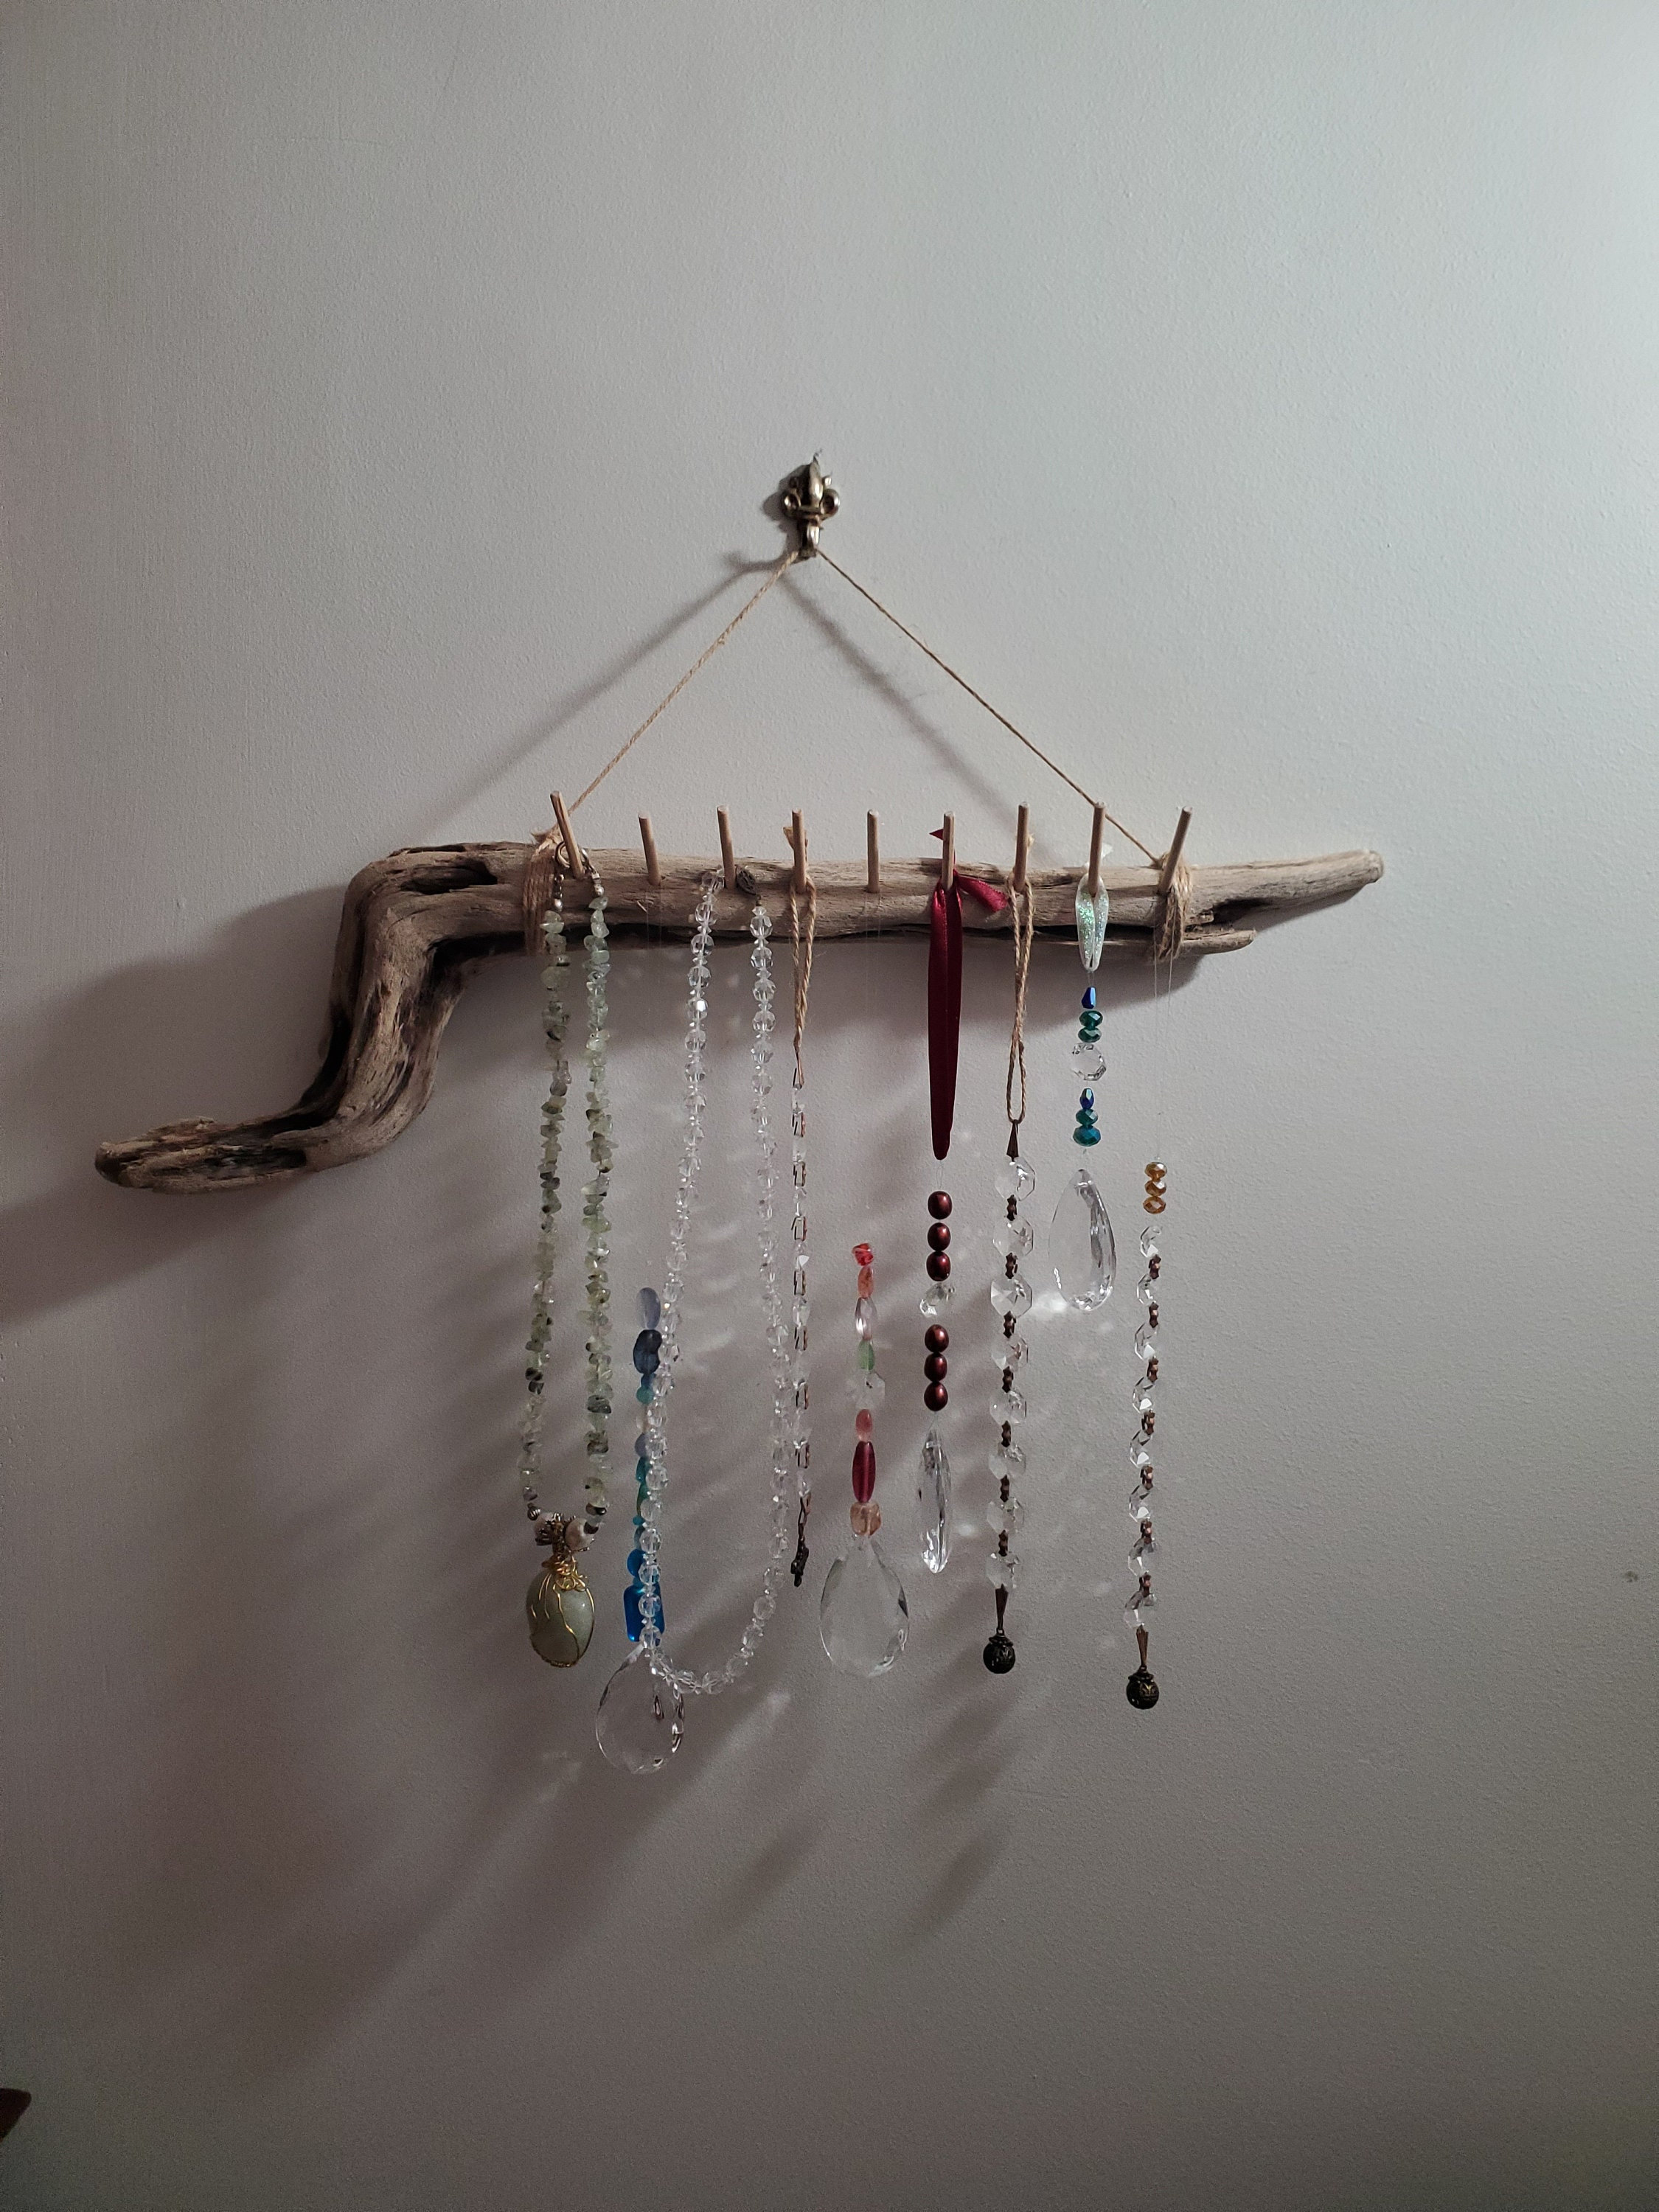 Crystal Necklace Hangers Holder Wall Mounted Acrylic Jewelry